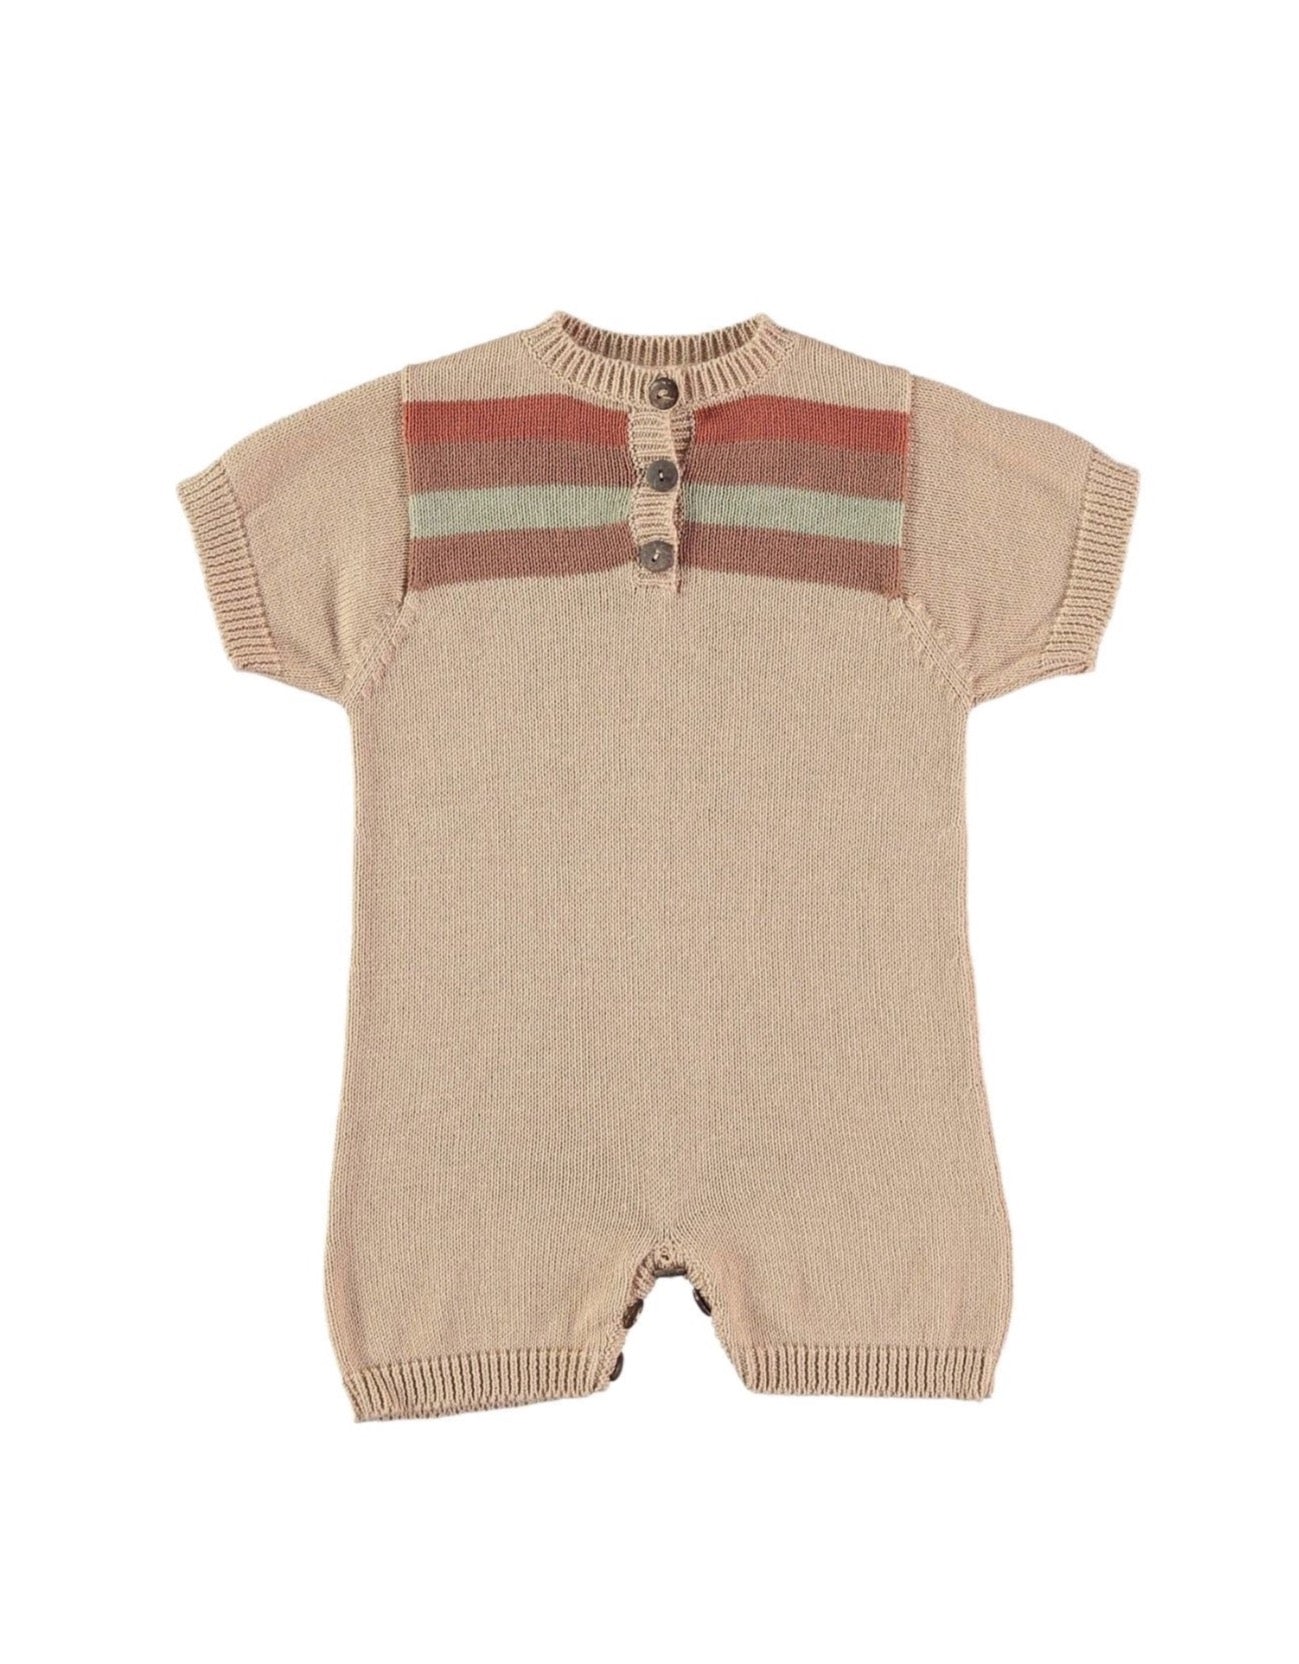 Knitted baby overalls Baby Grows Coco au lait 